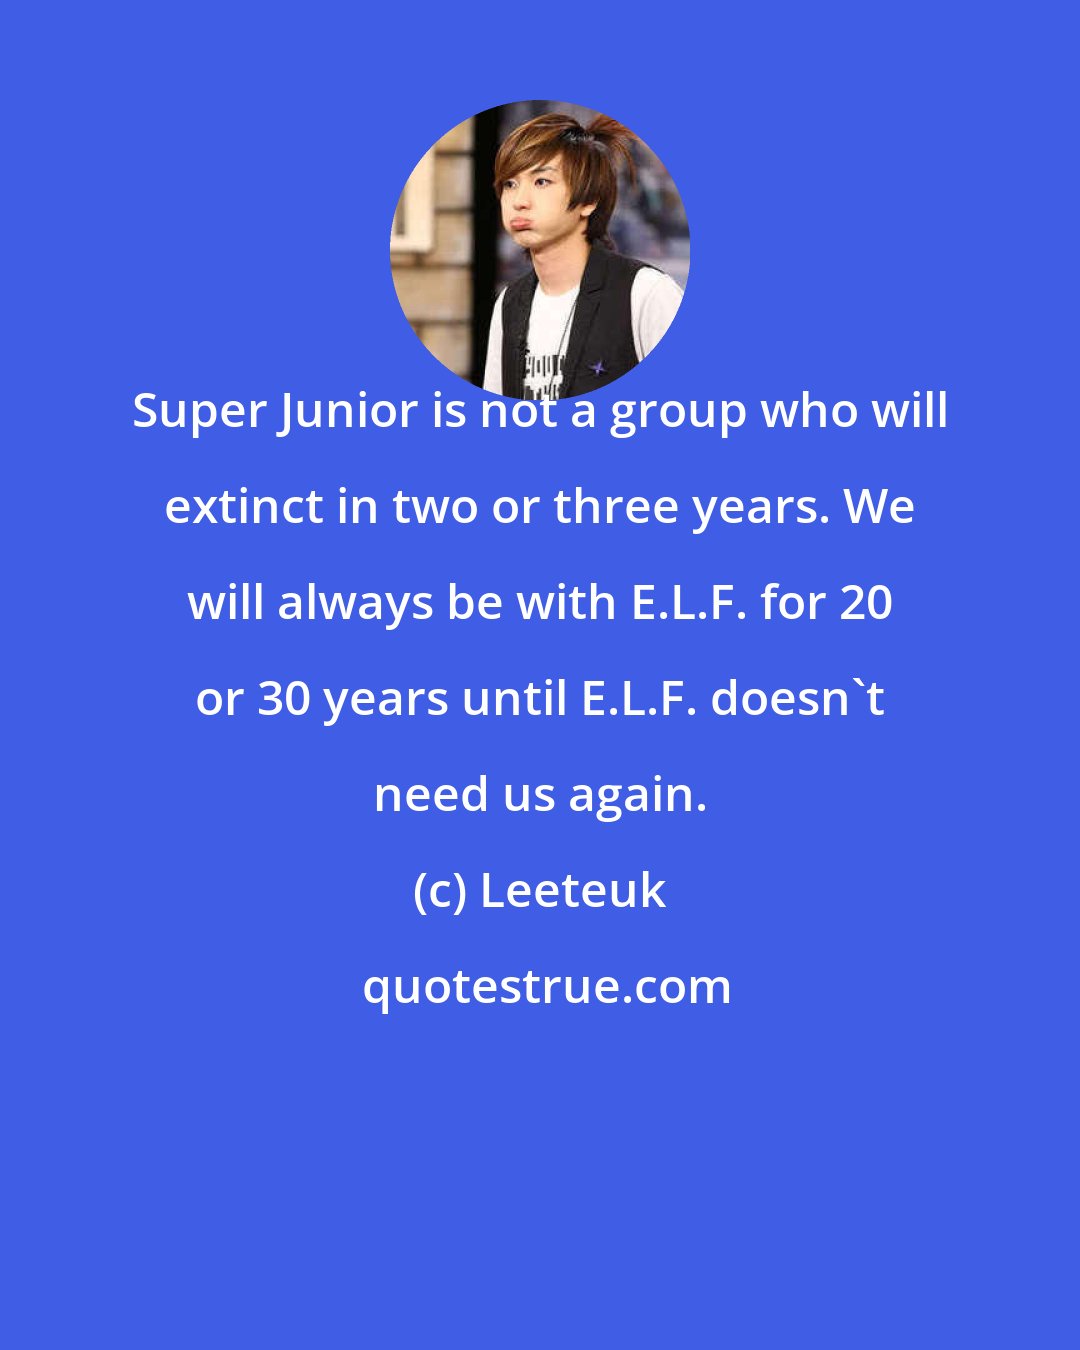 Leeteuk: Super Junior is not a group who will extinct in two or three years. We will always be with E.L.F. for 20 or 30 years until E.L.F. doesn't need us again.